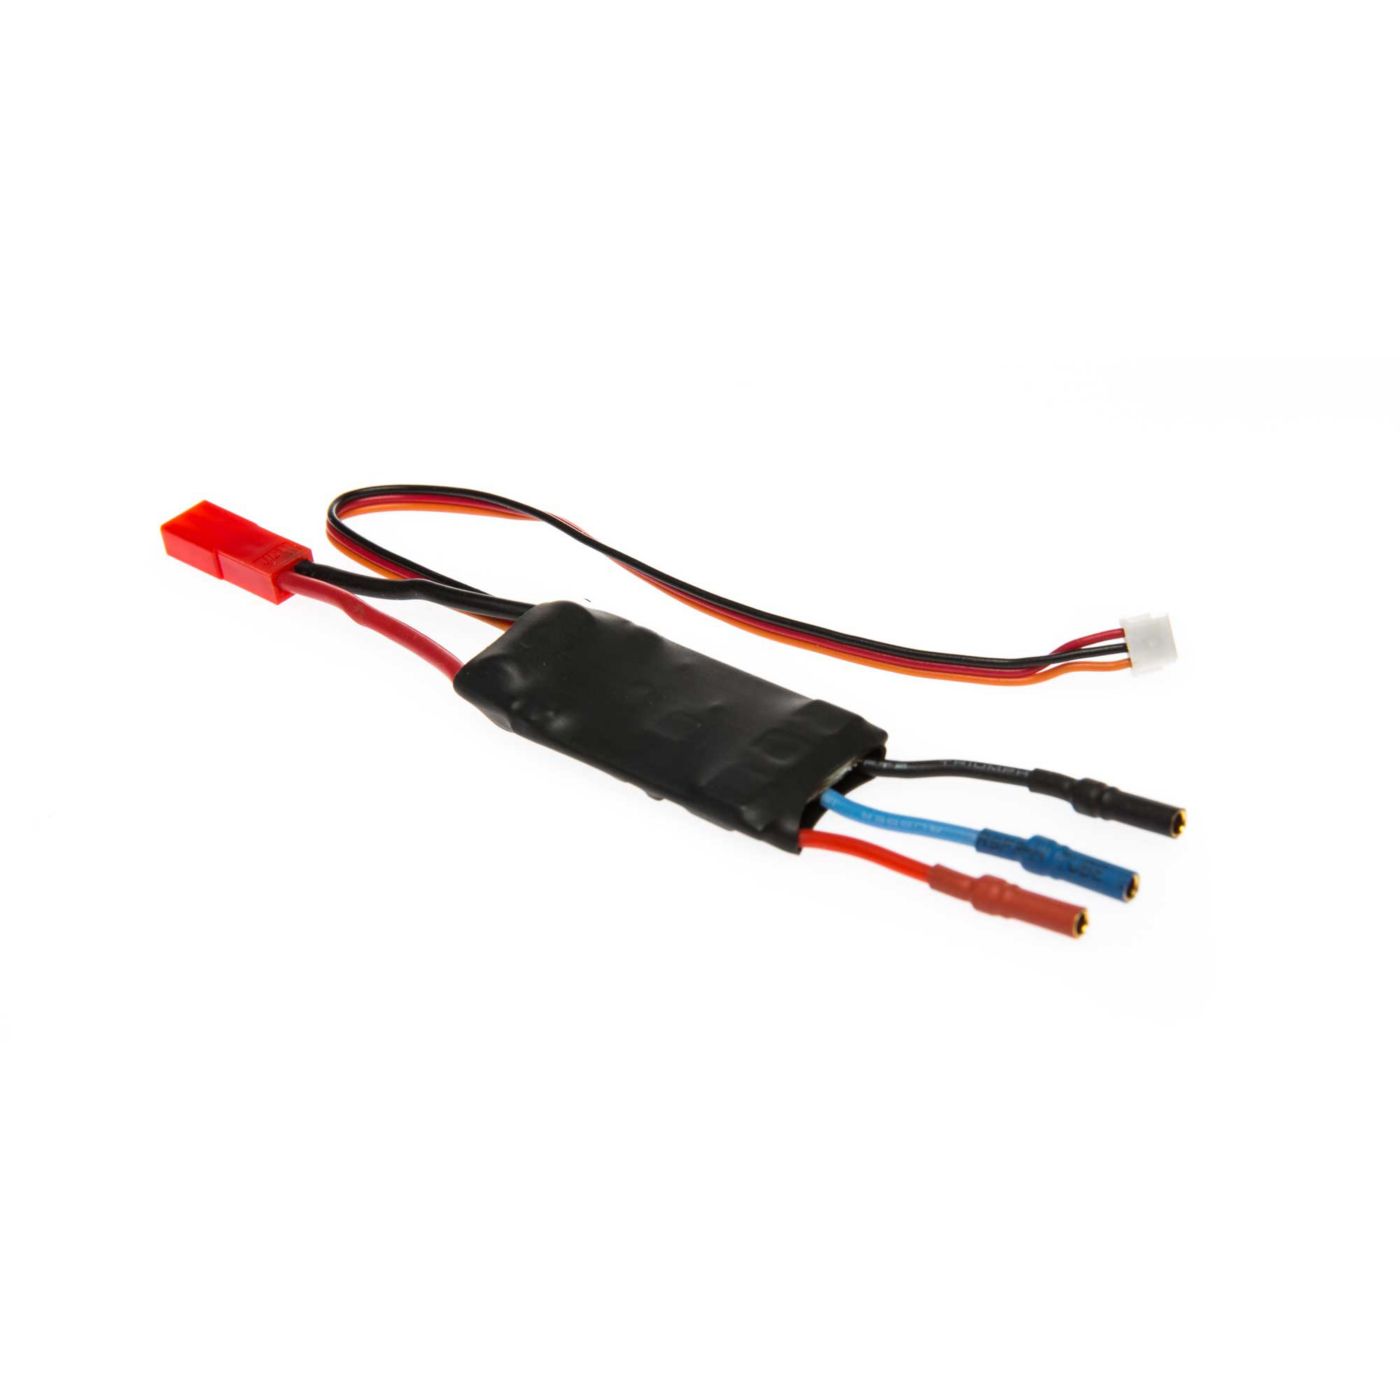 Blade 20A Brushless ESC Fusion 180 - BLH5820